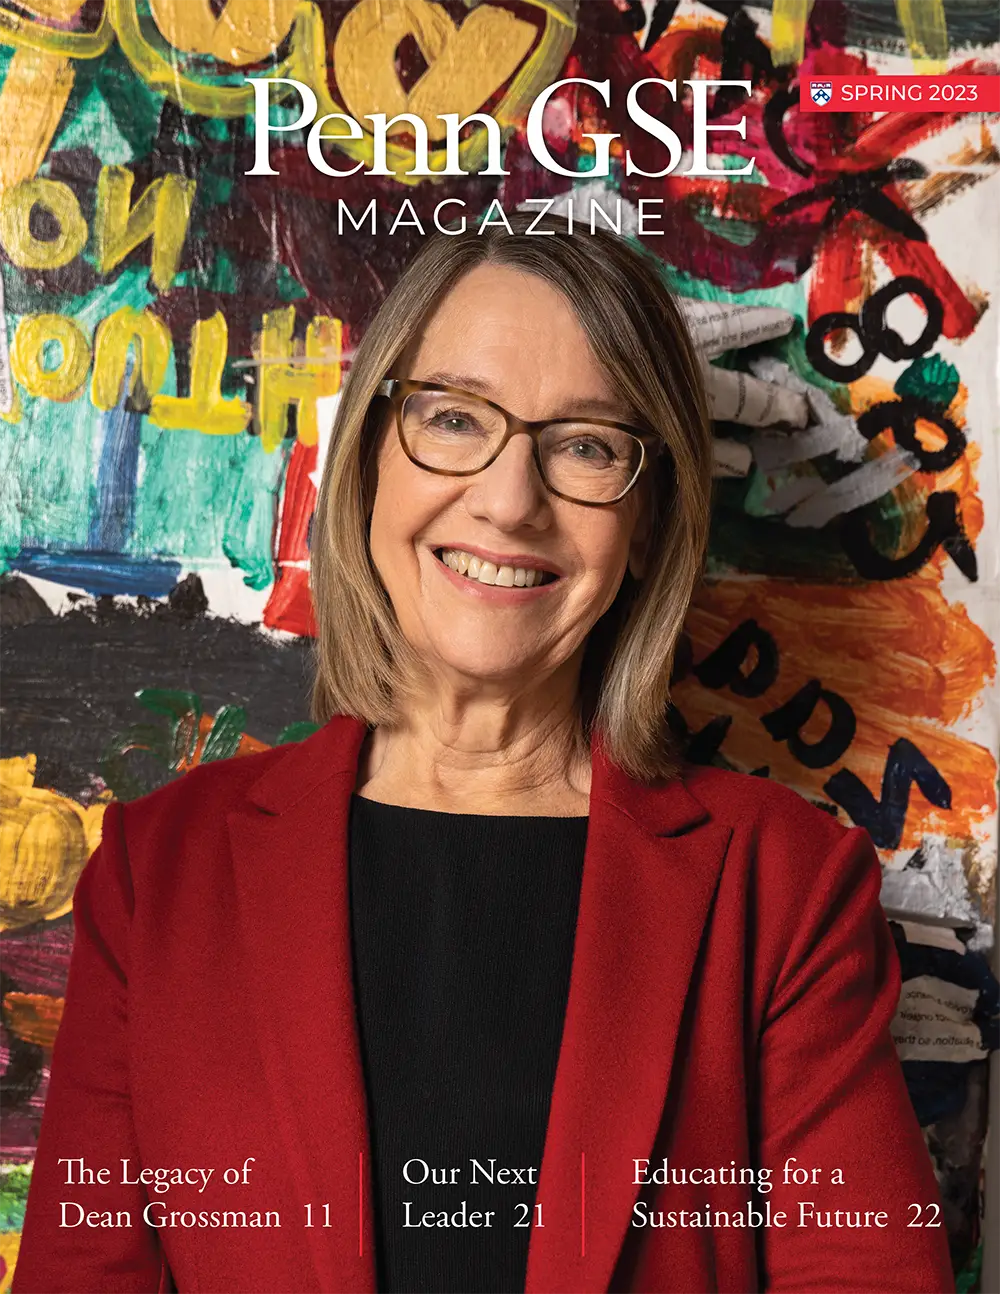 The cover of the Spring 2023 issue of The Penn GSE Magazine. A headshot of Dean Pam Grossman, who wears a red suit and brown glasses, smiling at the camera against a colorful, painted wall. The headline reads 